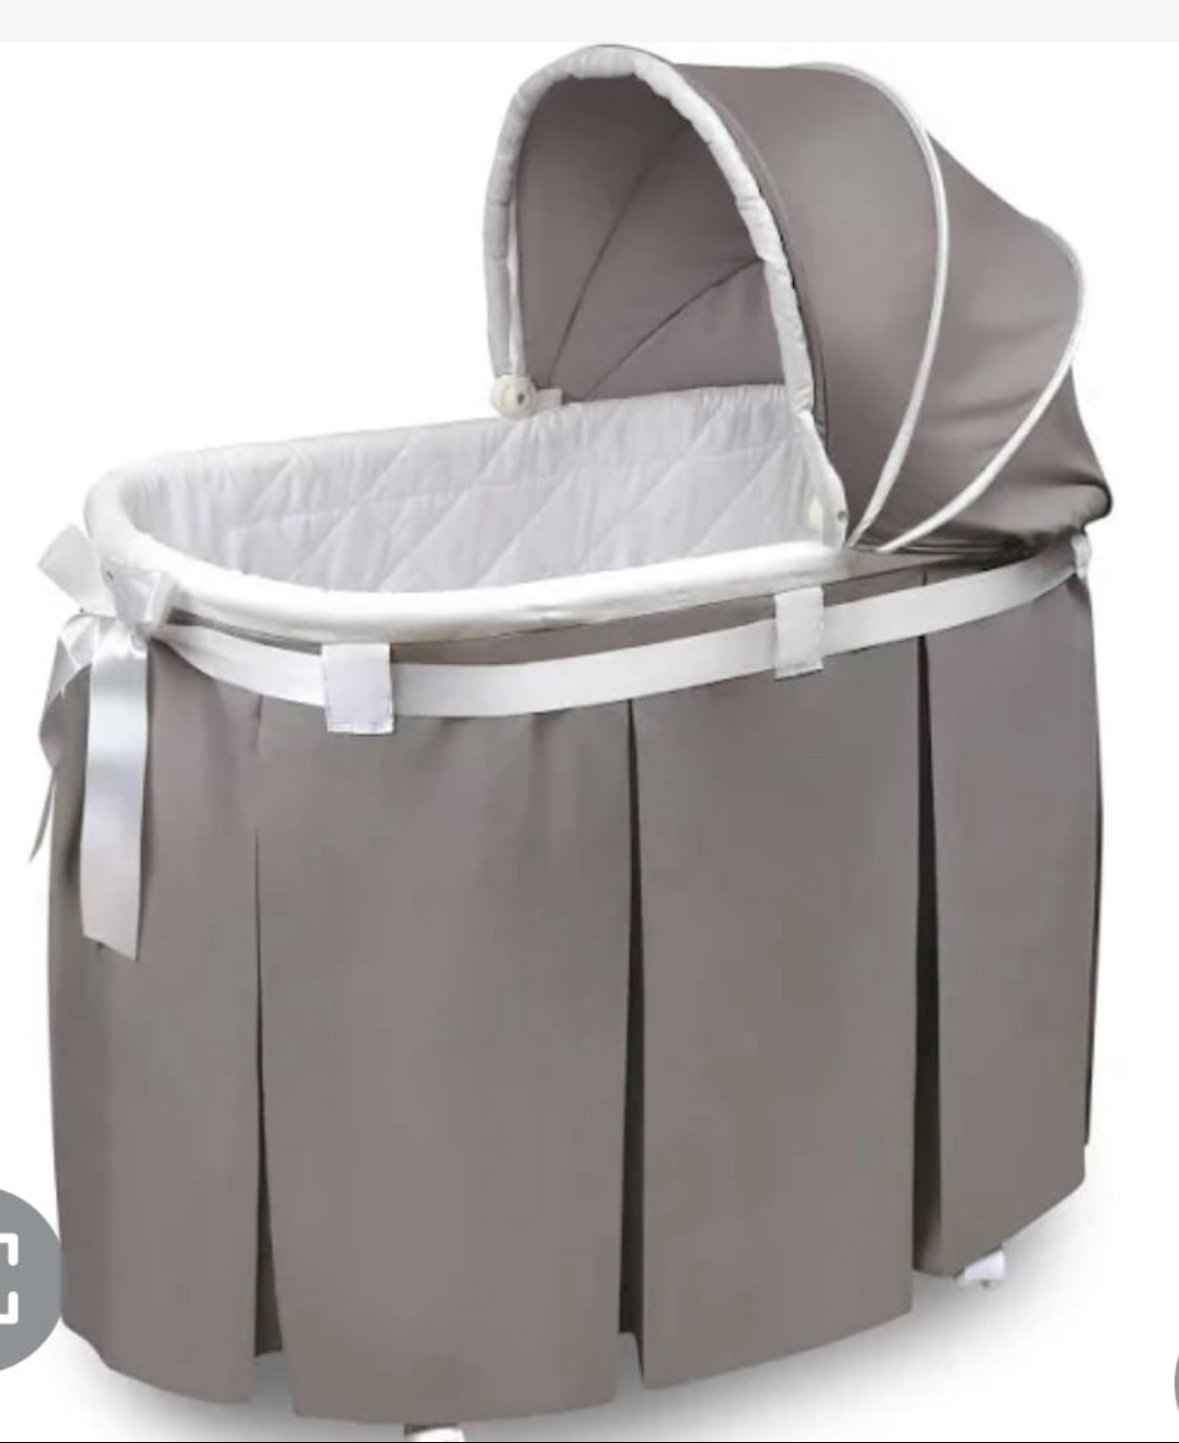 Badger Basket Wishes Oval Bassinet, Gray  Open box item  INVENTORY NUMBER: 10140 DTaN6GMbE